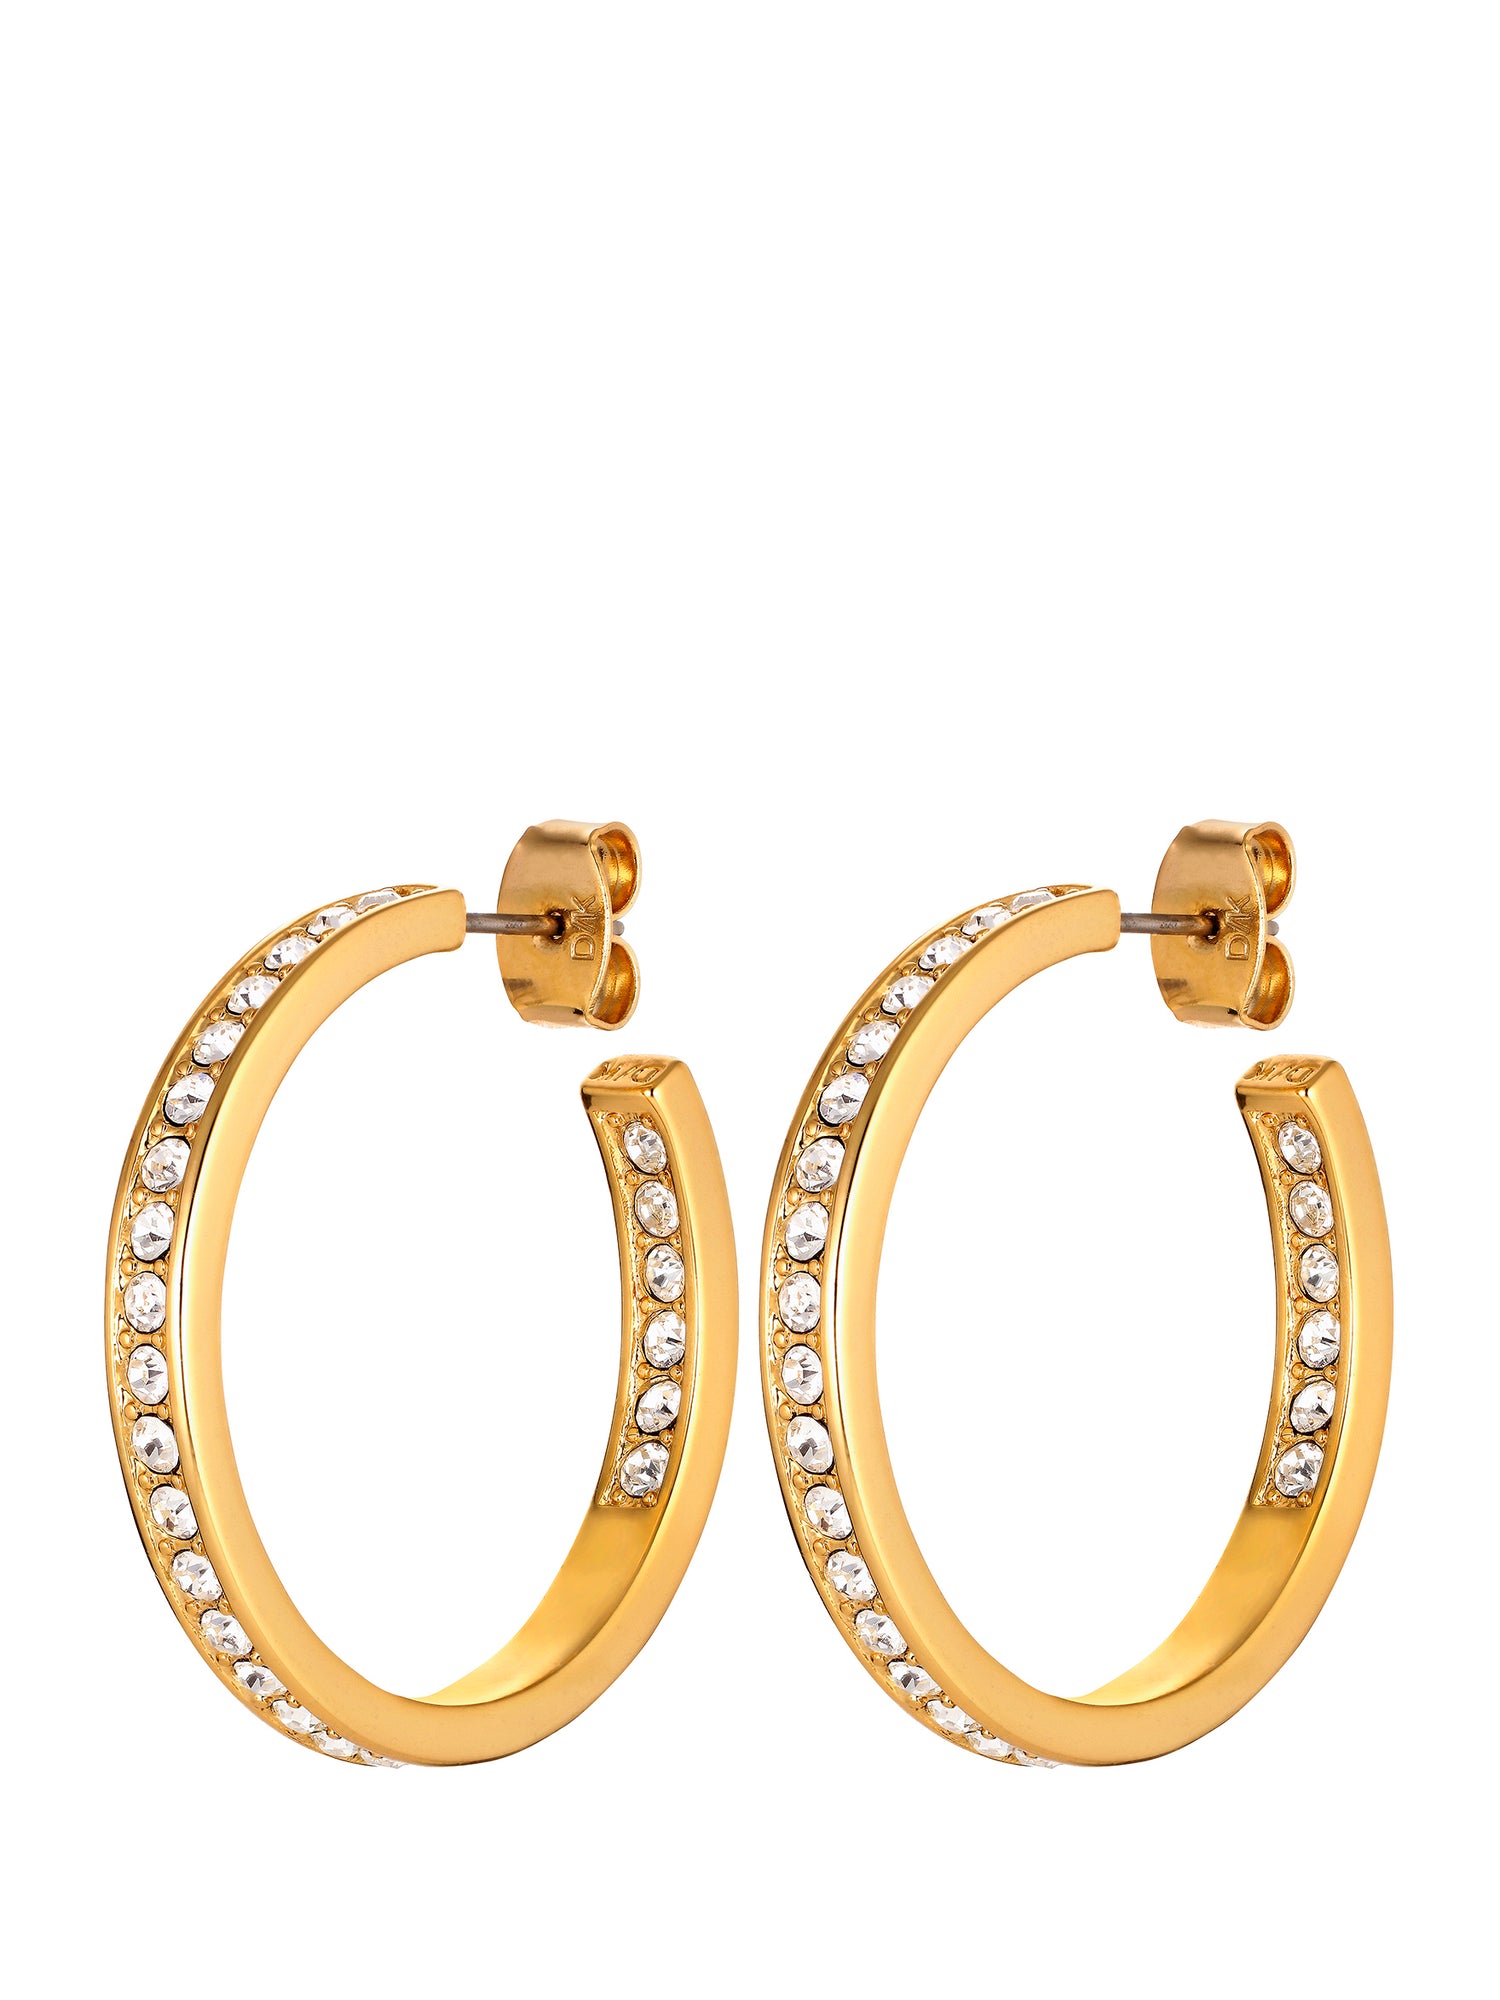 JUSTINA SG CRYSTAL GOLD EARRING